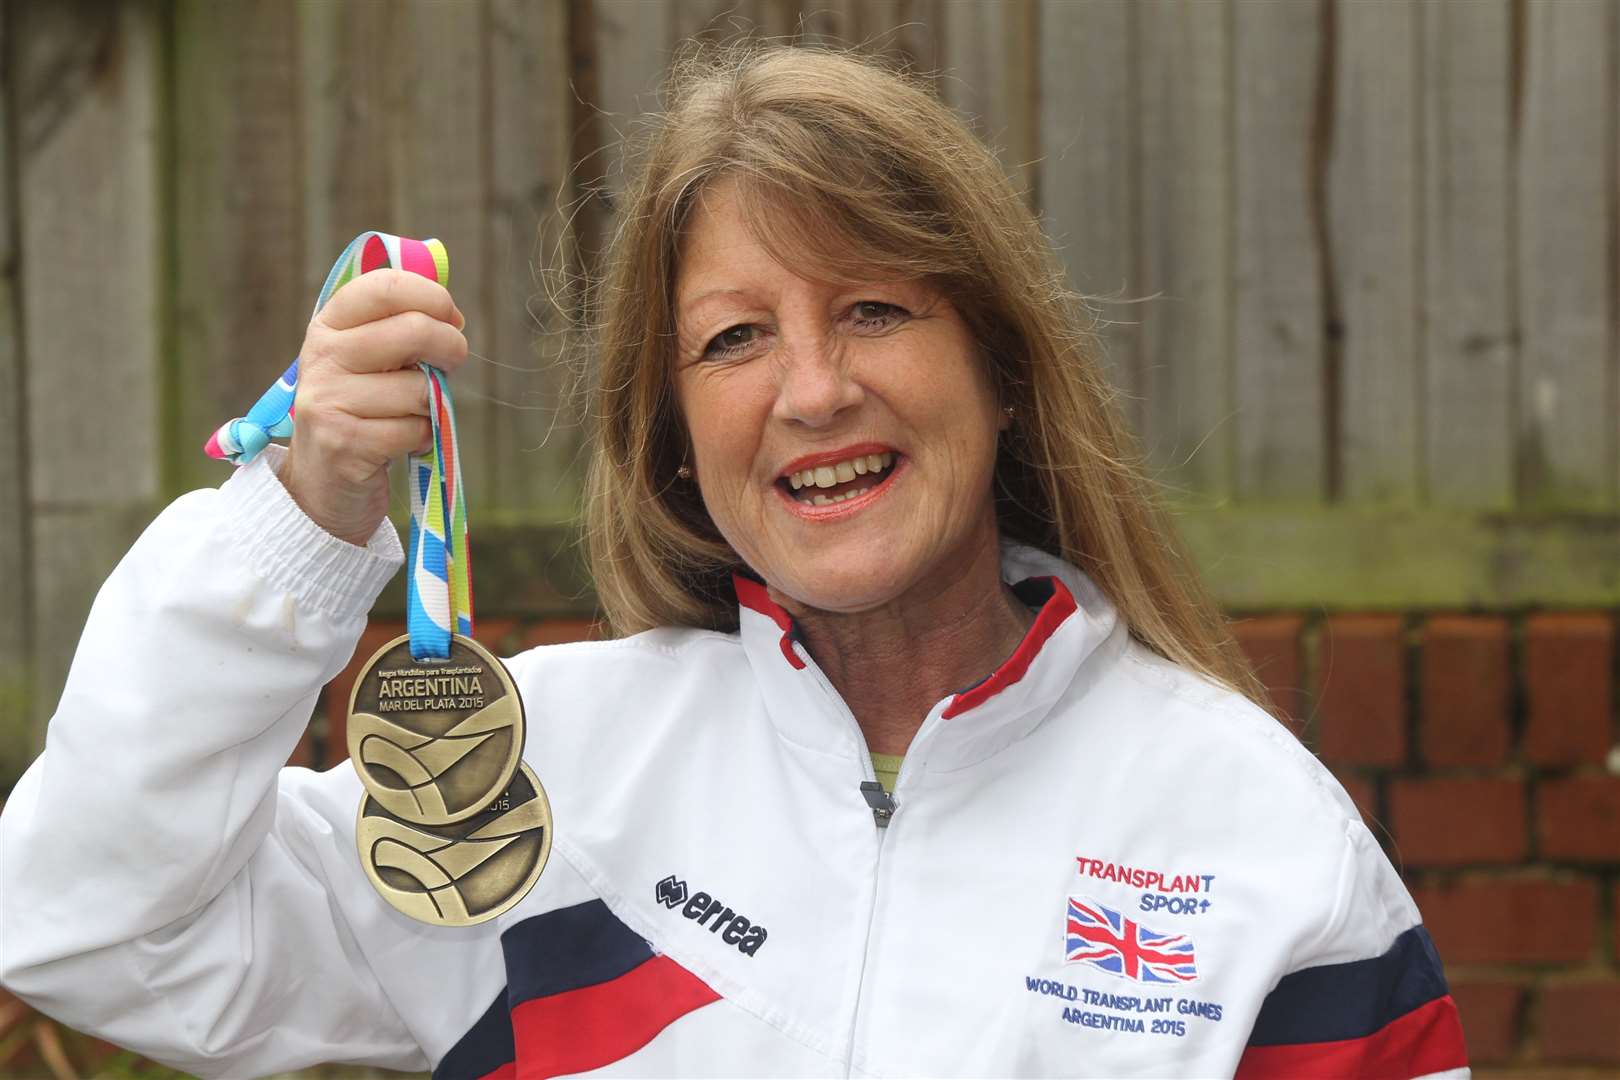 Nicky Clifford won two bronze medals at the World Transplant Games in Argentina